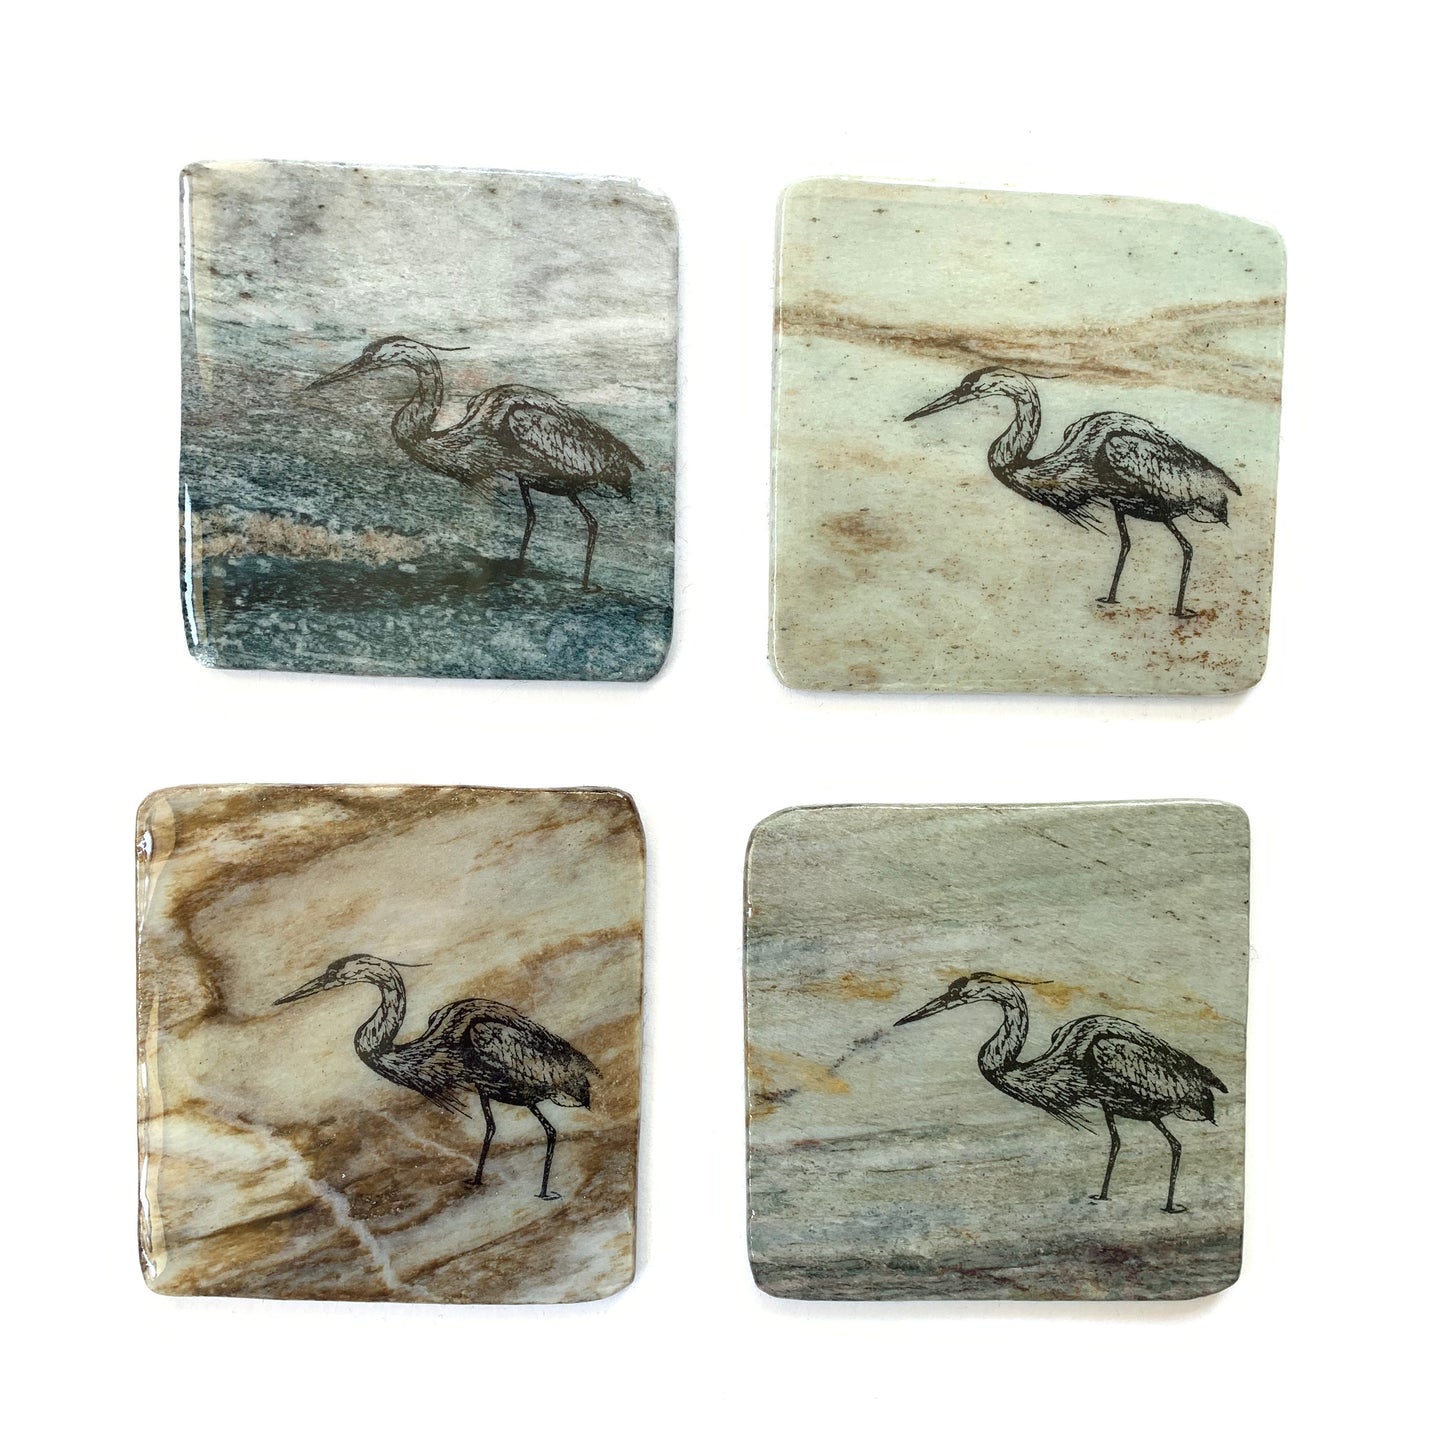 Various granite coasters with blue heron design made in Canada.